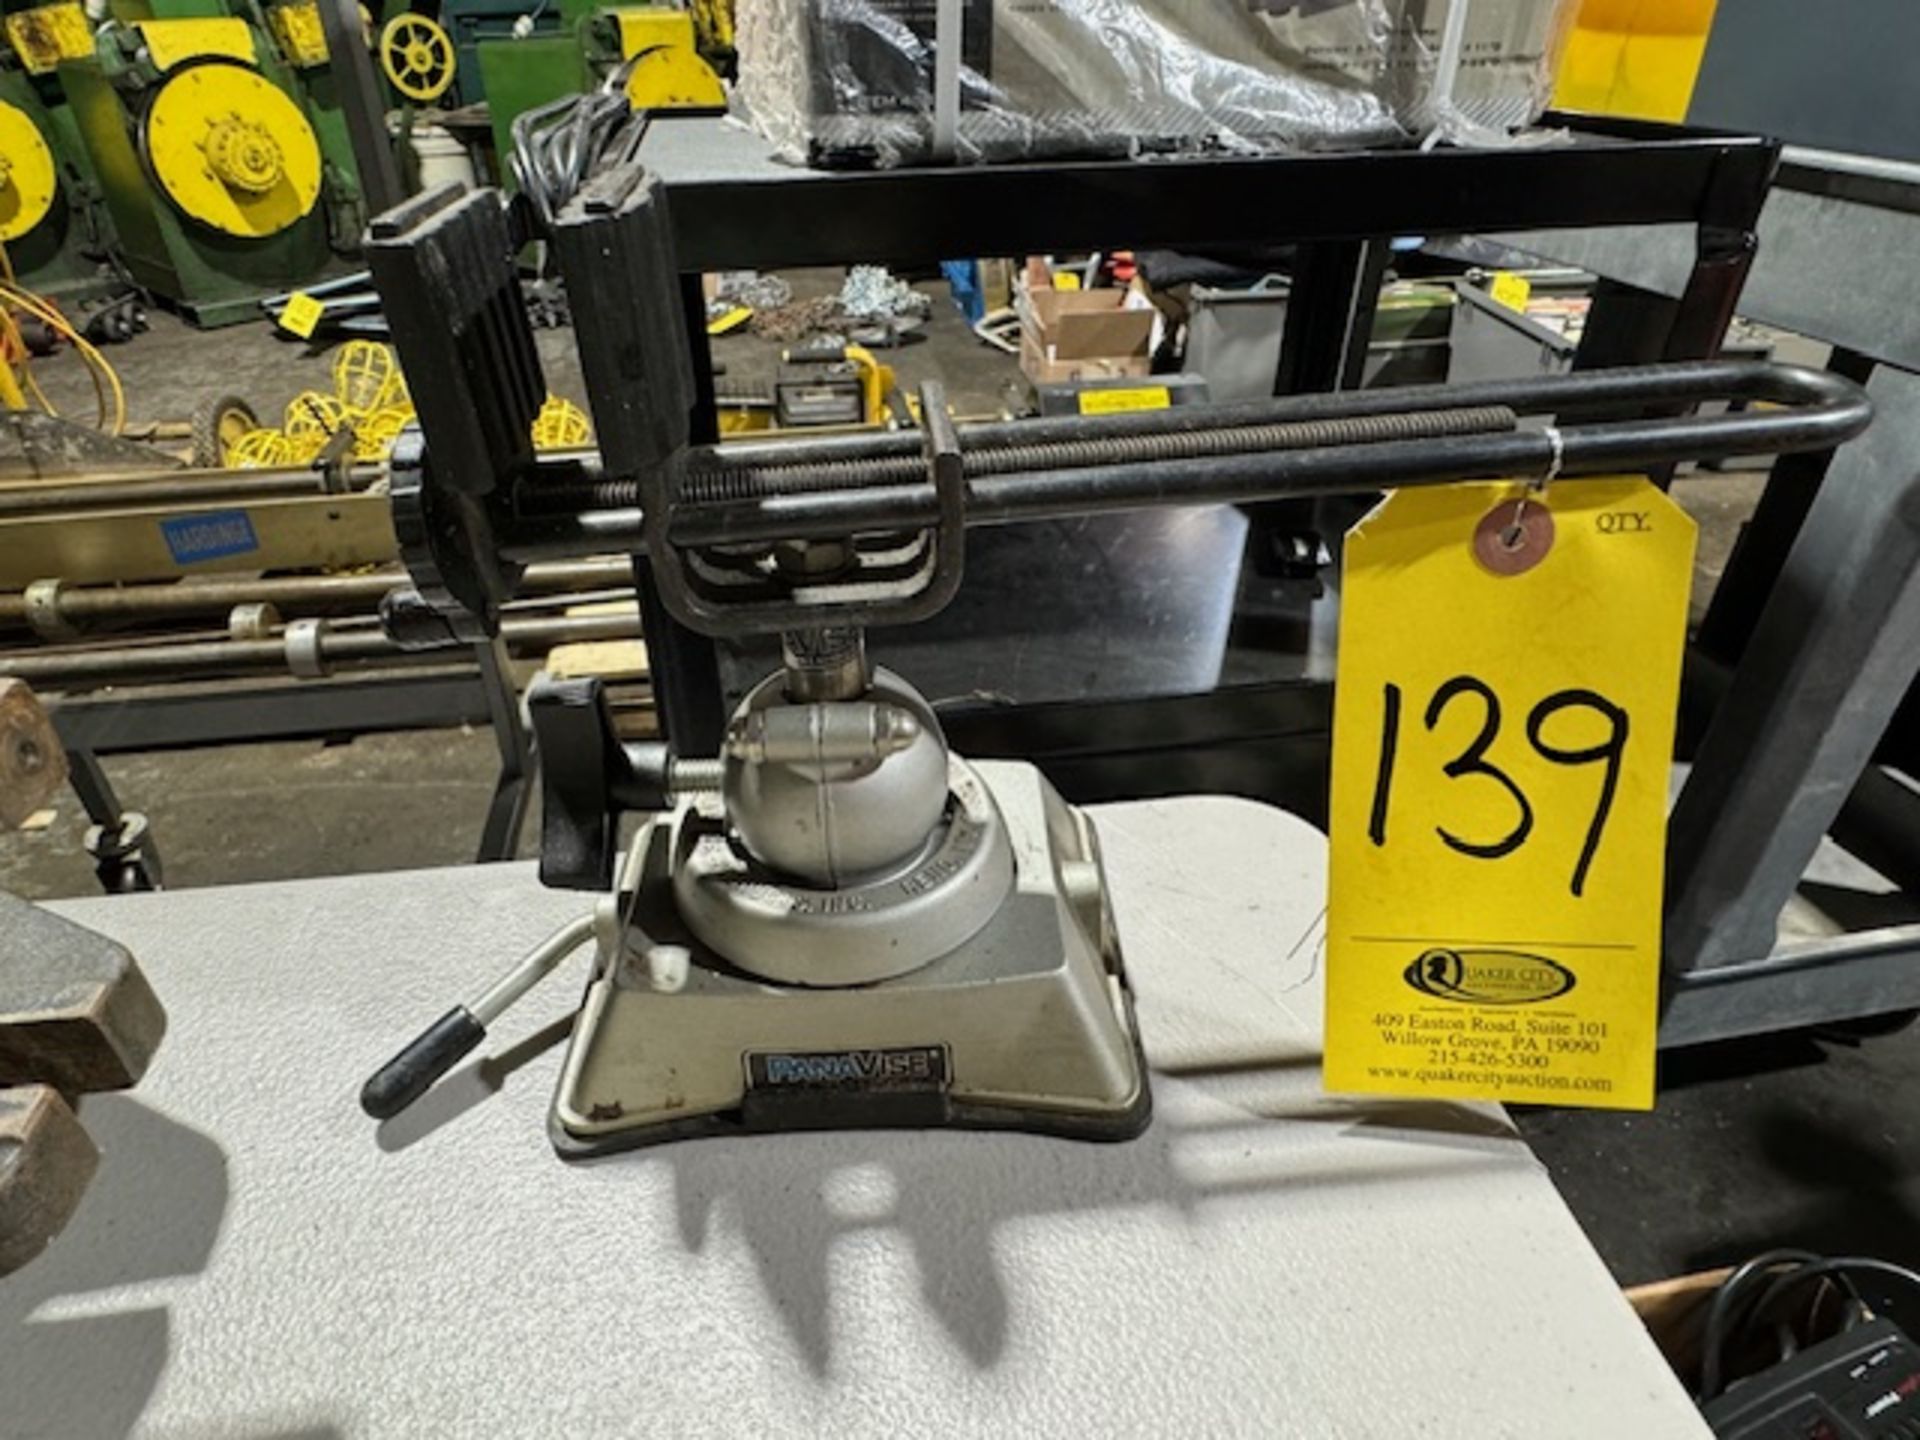 PANAVISE MULTI-ANGLE LIGHT DUTY VISE WITH SUCTION BASE (Located in Southampton, PA)